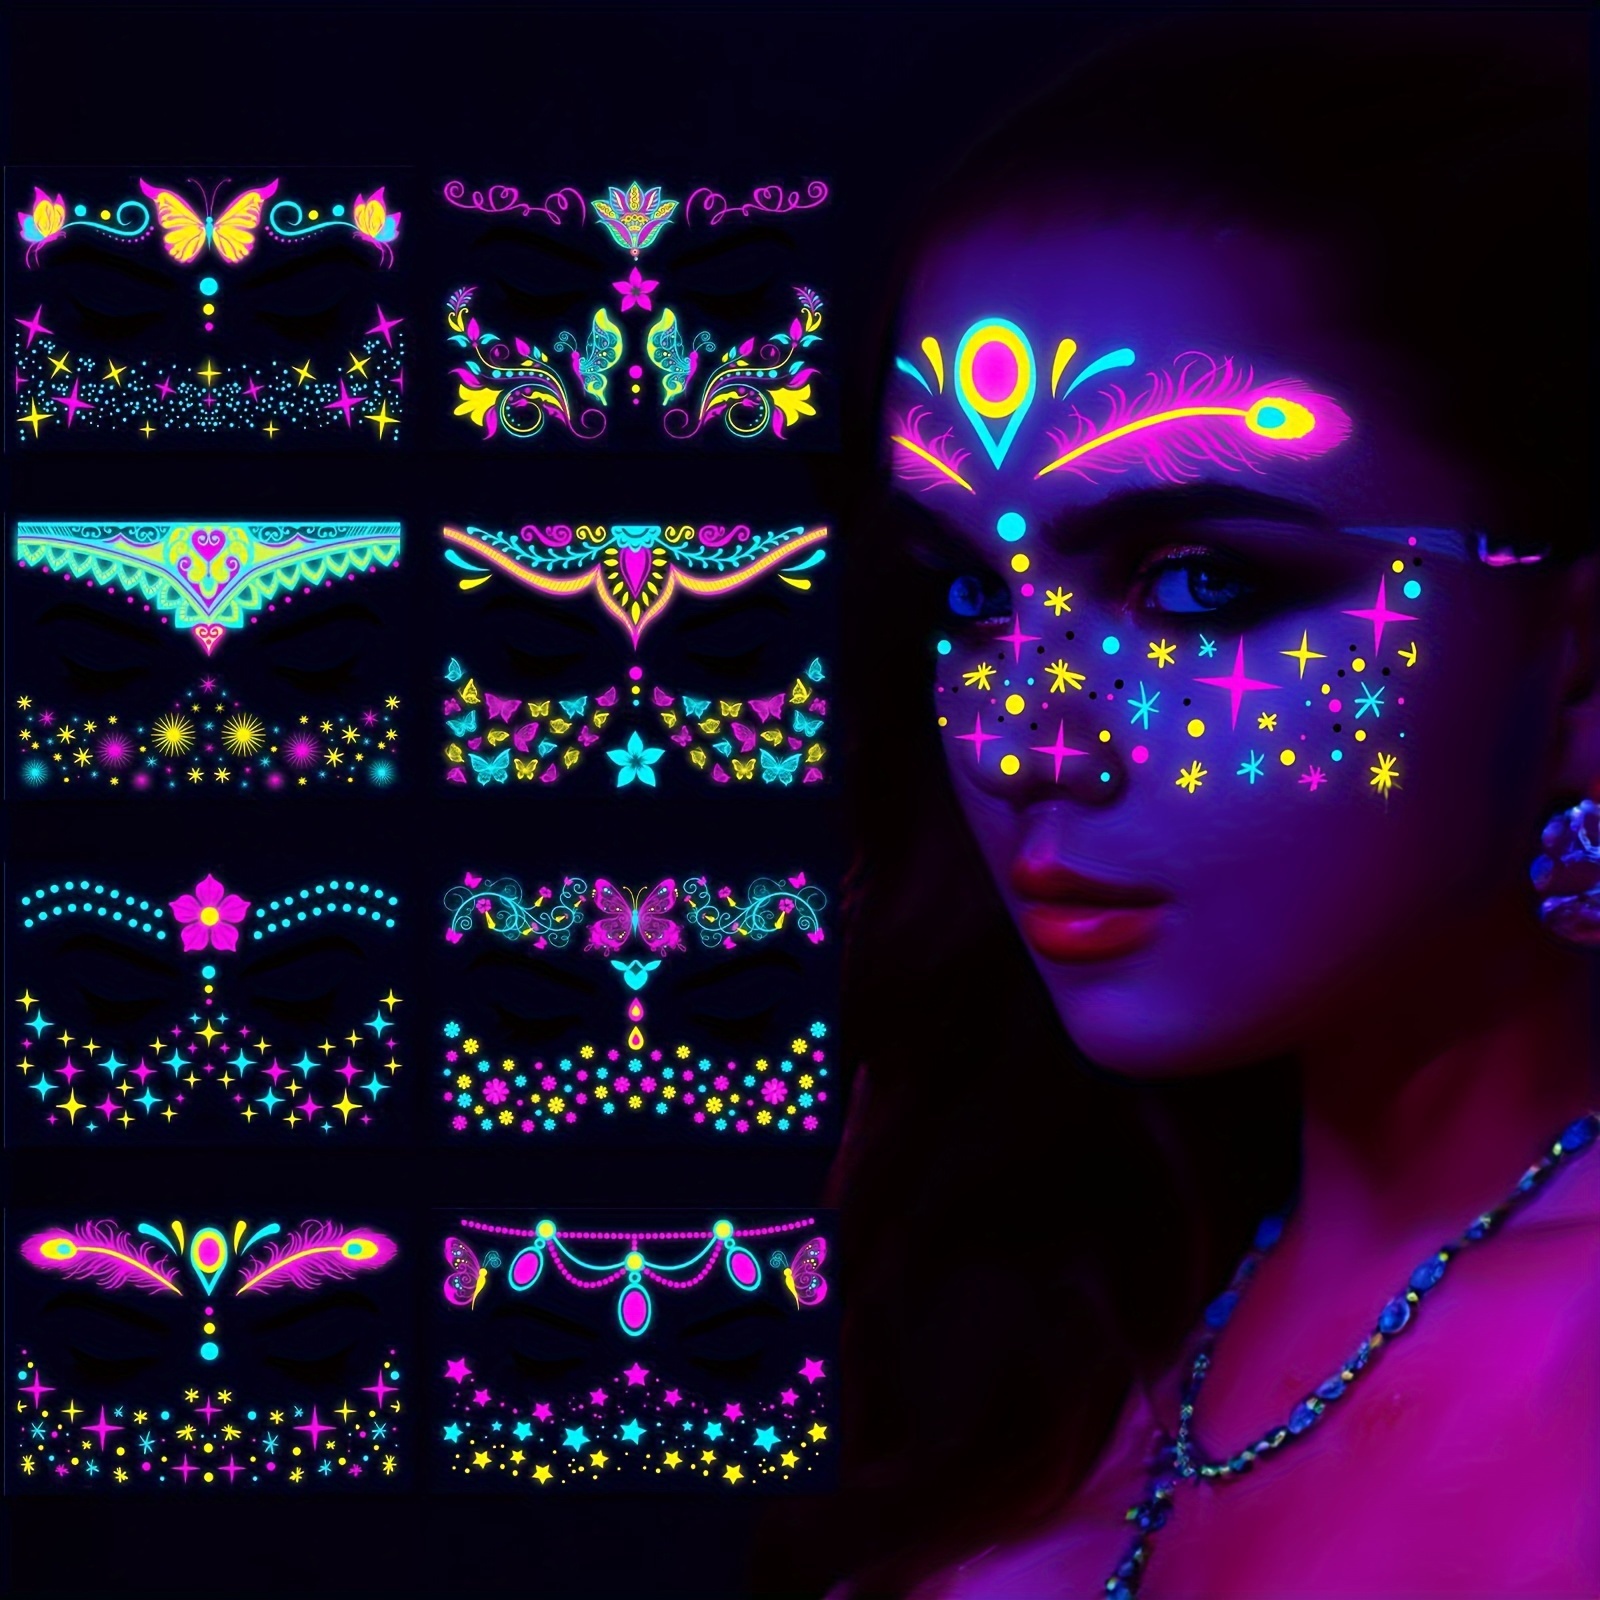 

Uv Neon Floral Glow In The Dark Temporary Tattoos Stickers - 8pcs, Unscented Easy Transfer Face & Body Paint Tattoo Decorations, Ideal For Adults, Girls, Festive, Bar & Party Supplies